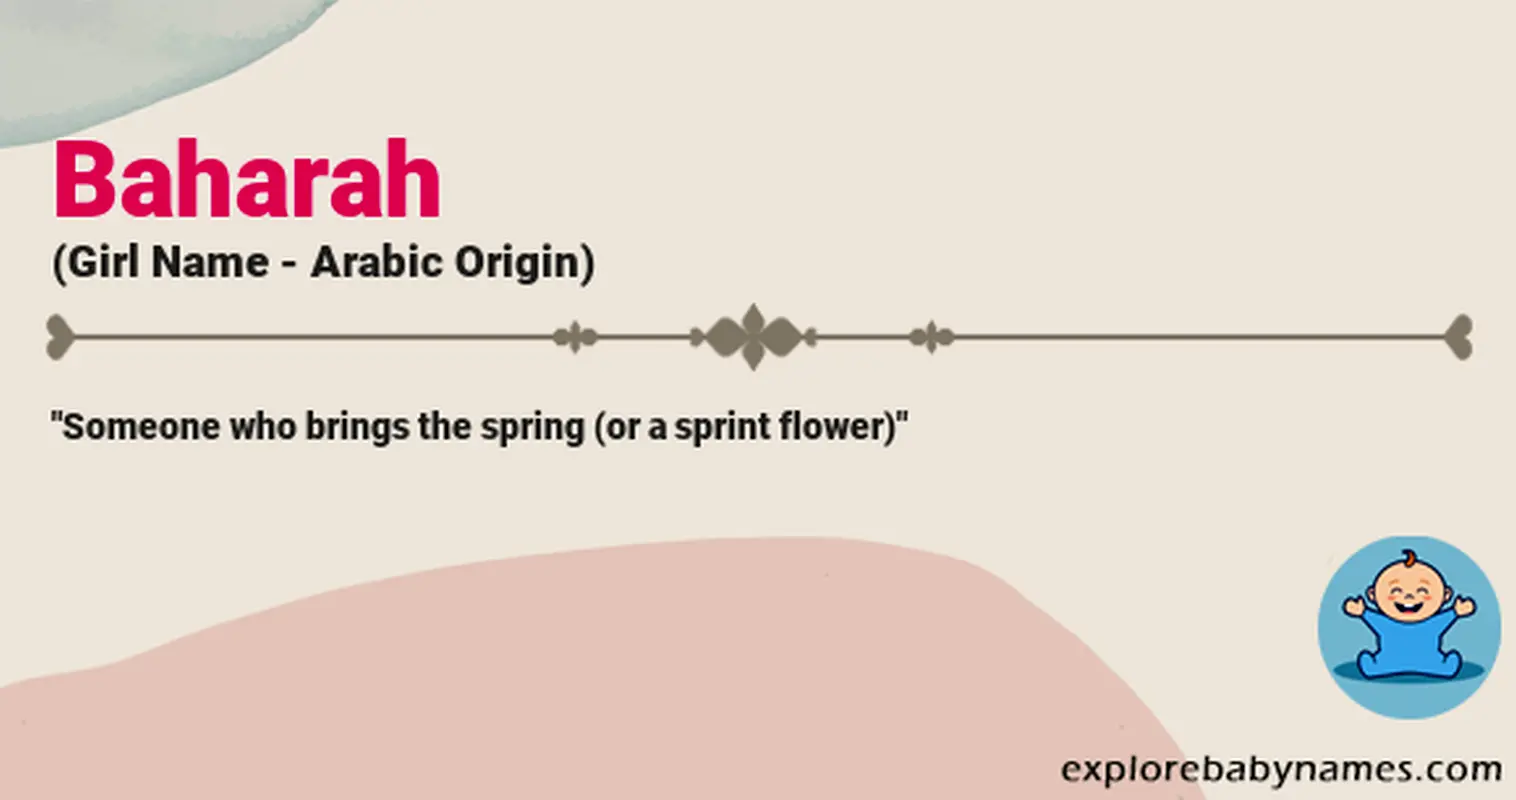 Meaning of Baharah